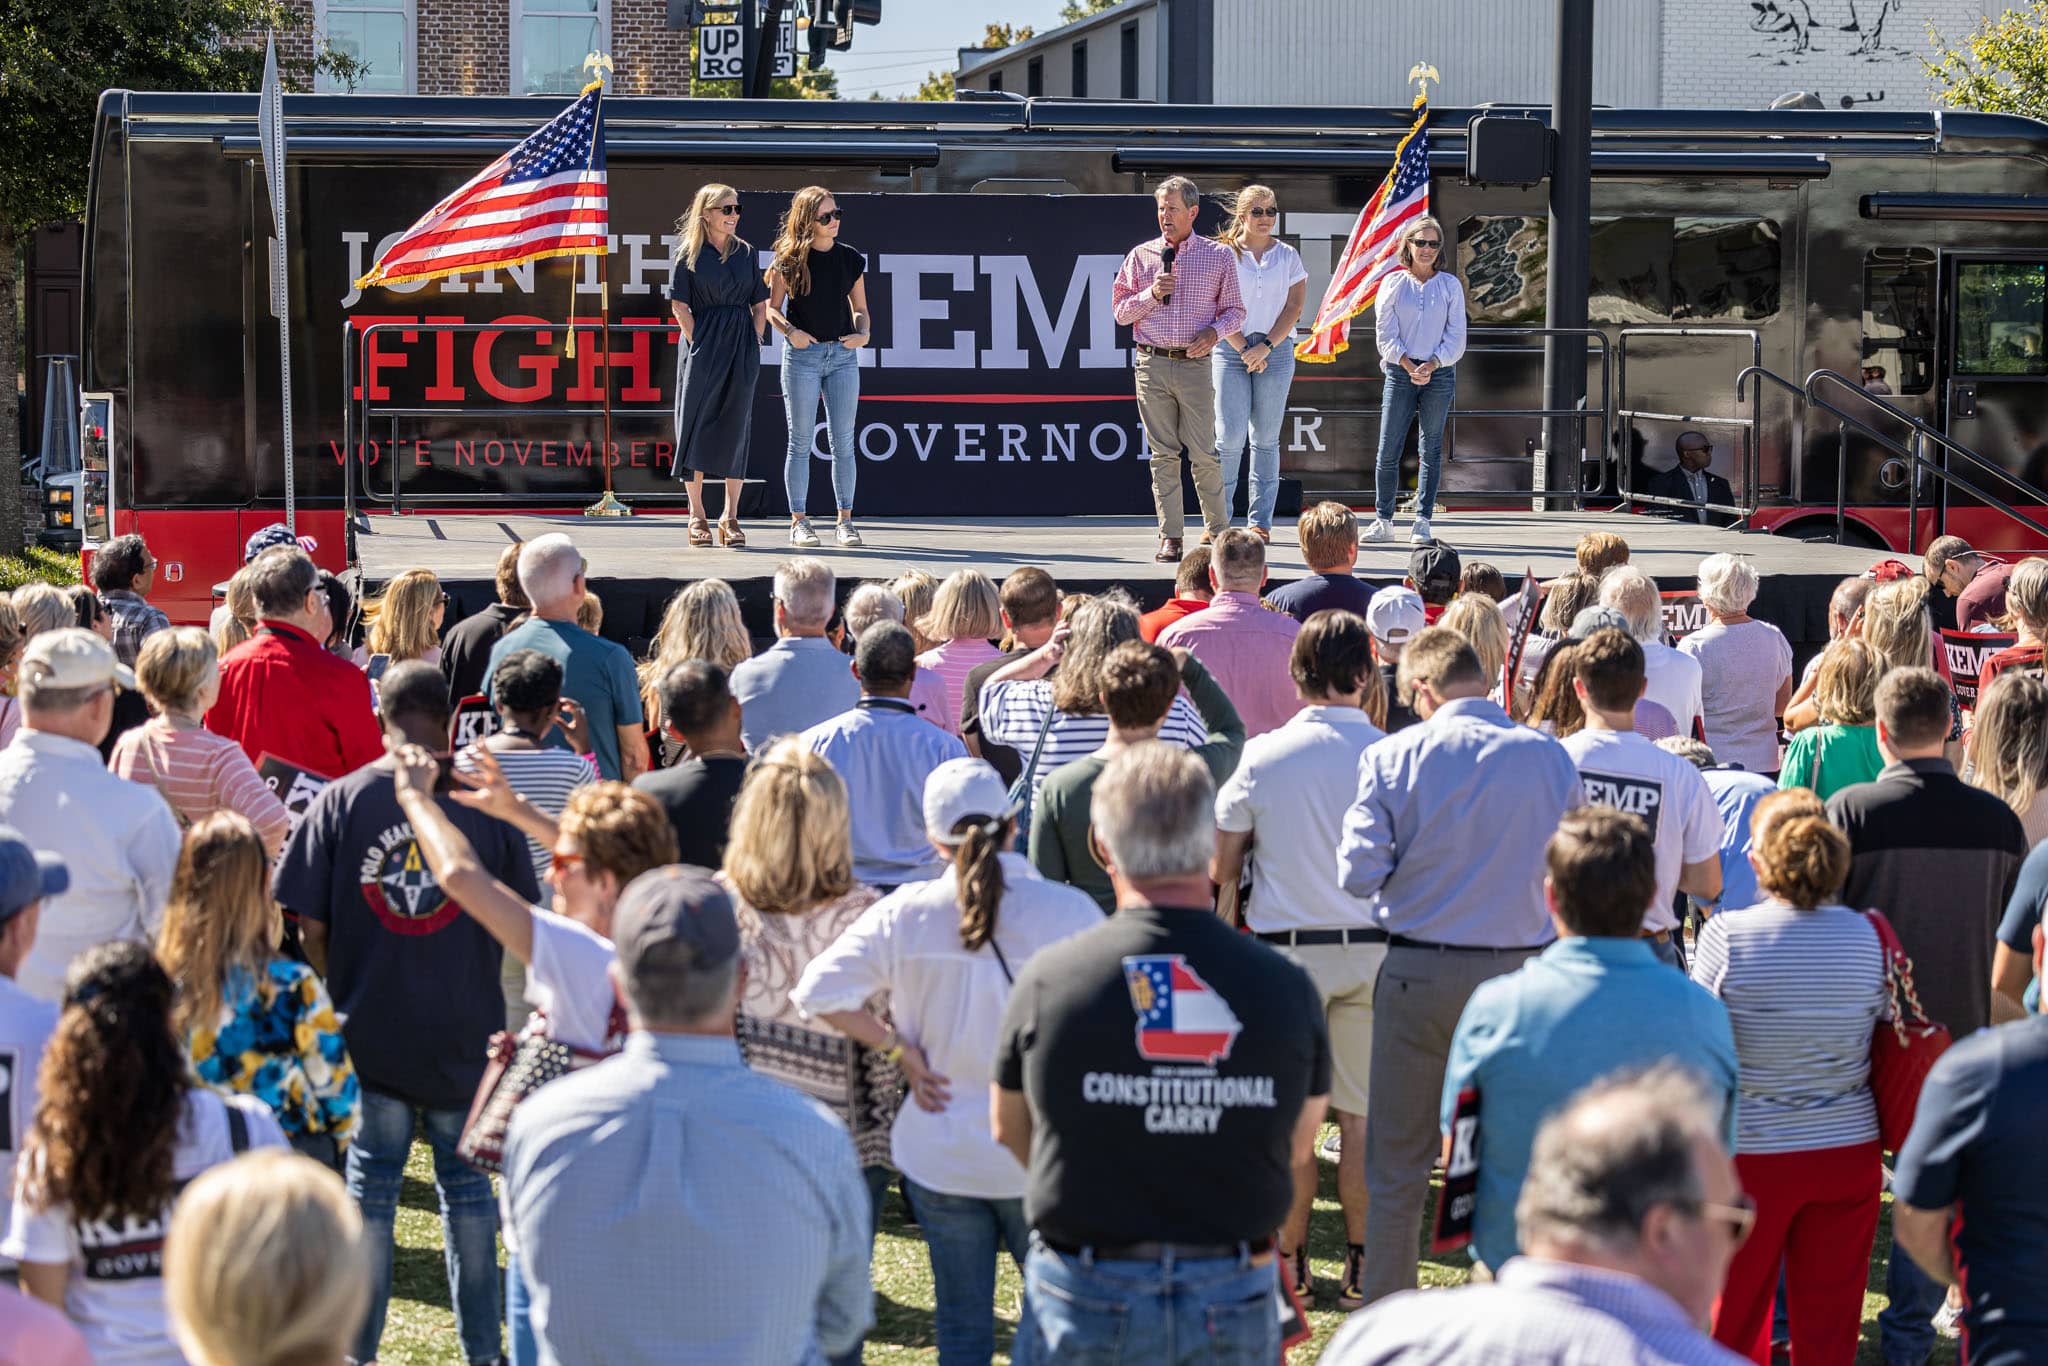 georgia-governor-kemp-speaking-on-stage-to-crowd-of-people-while-family-stands-behind-and-watch